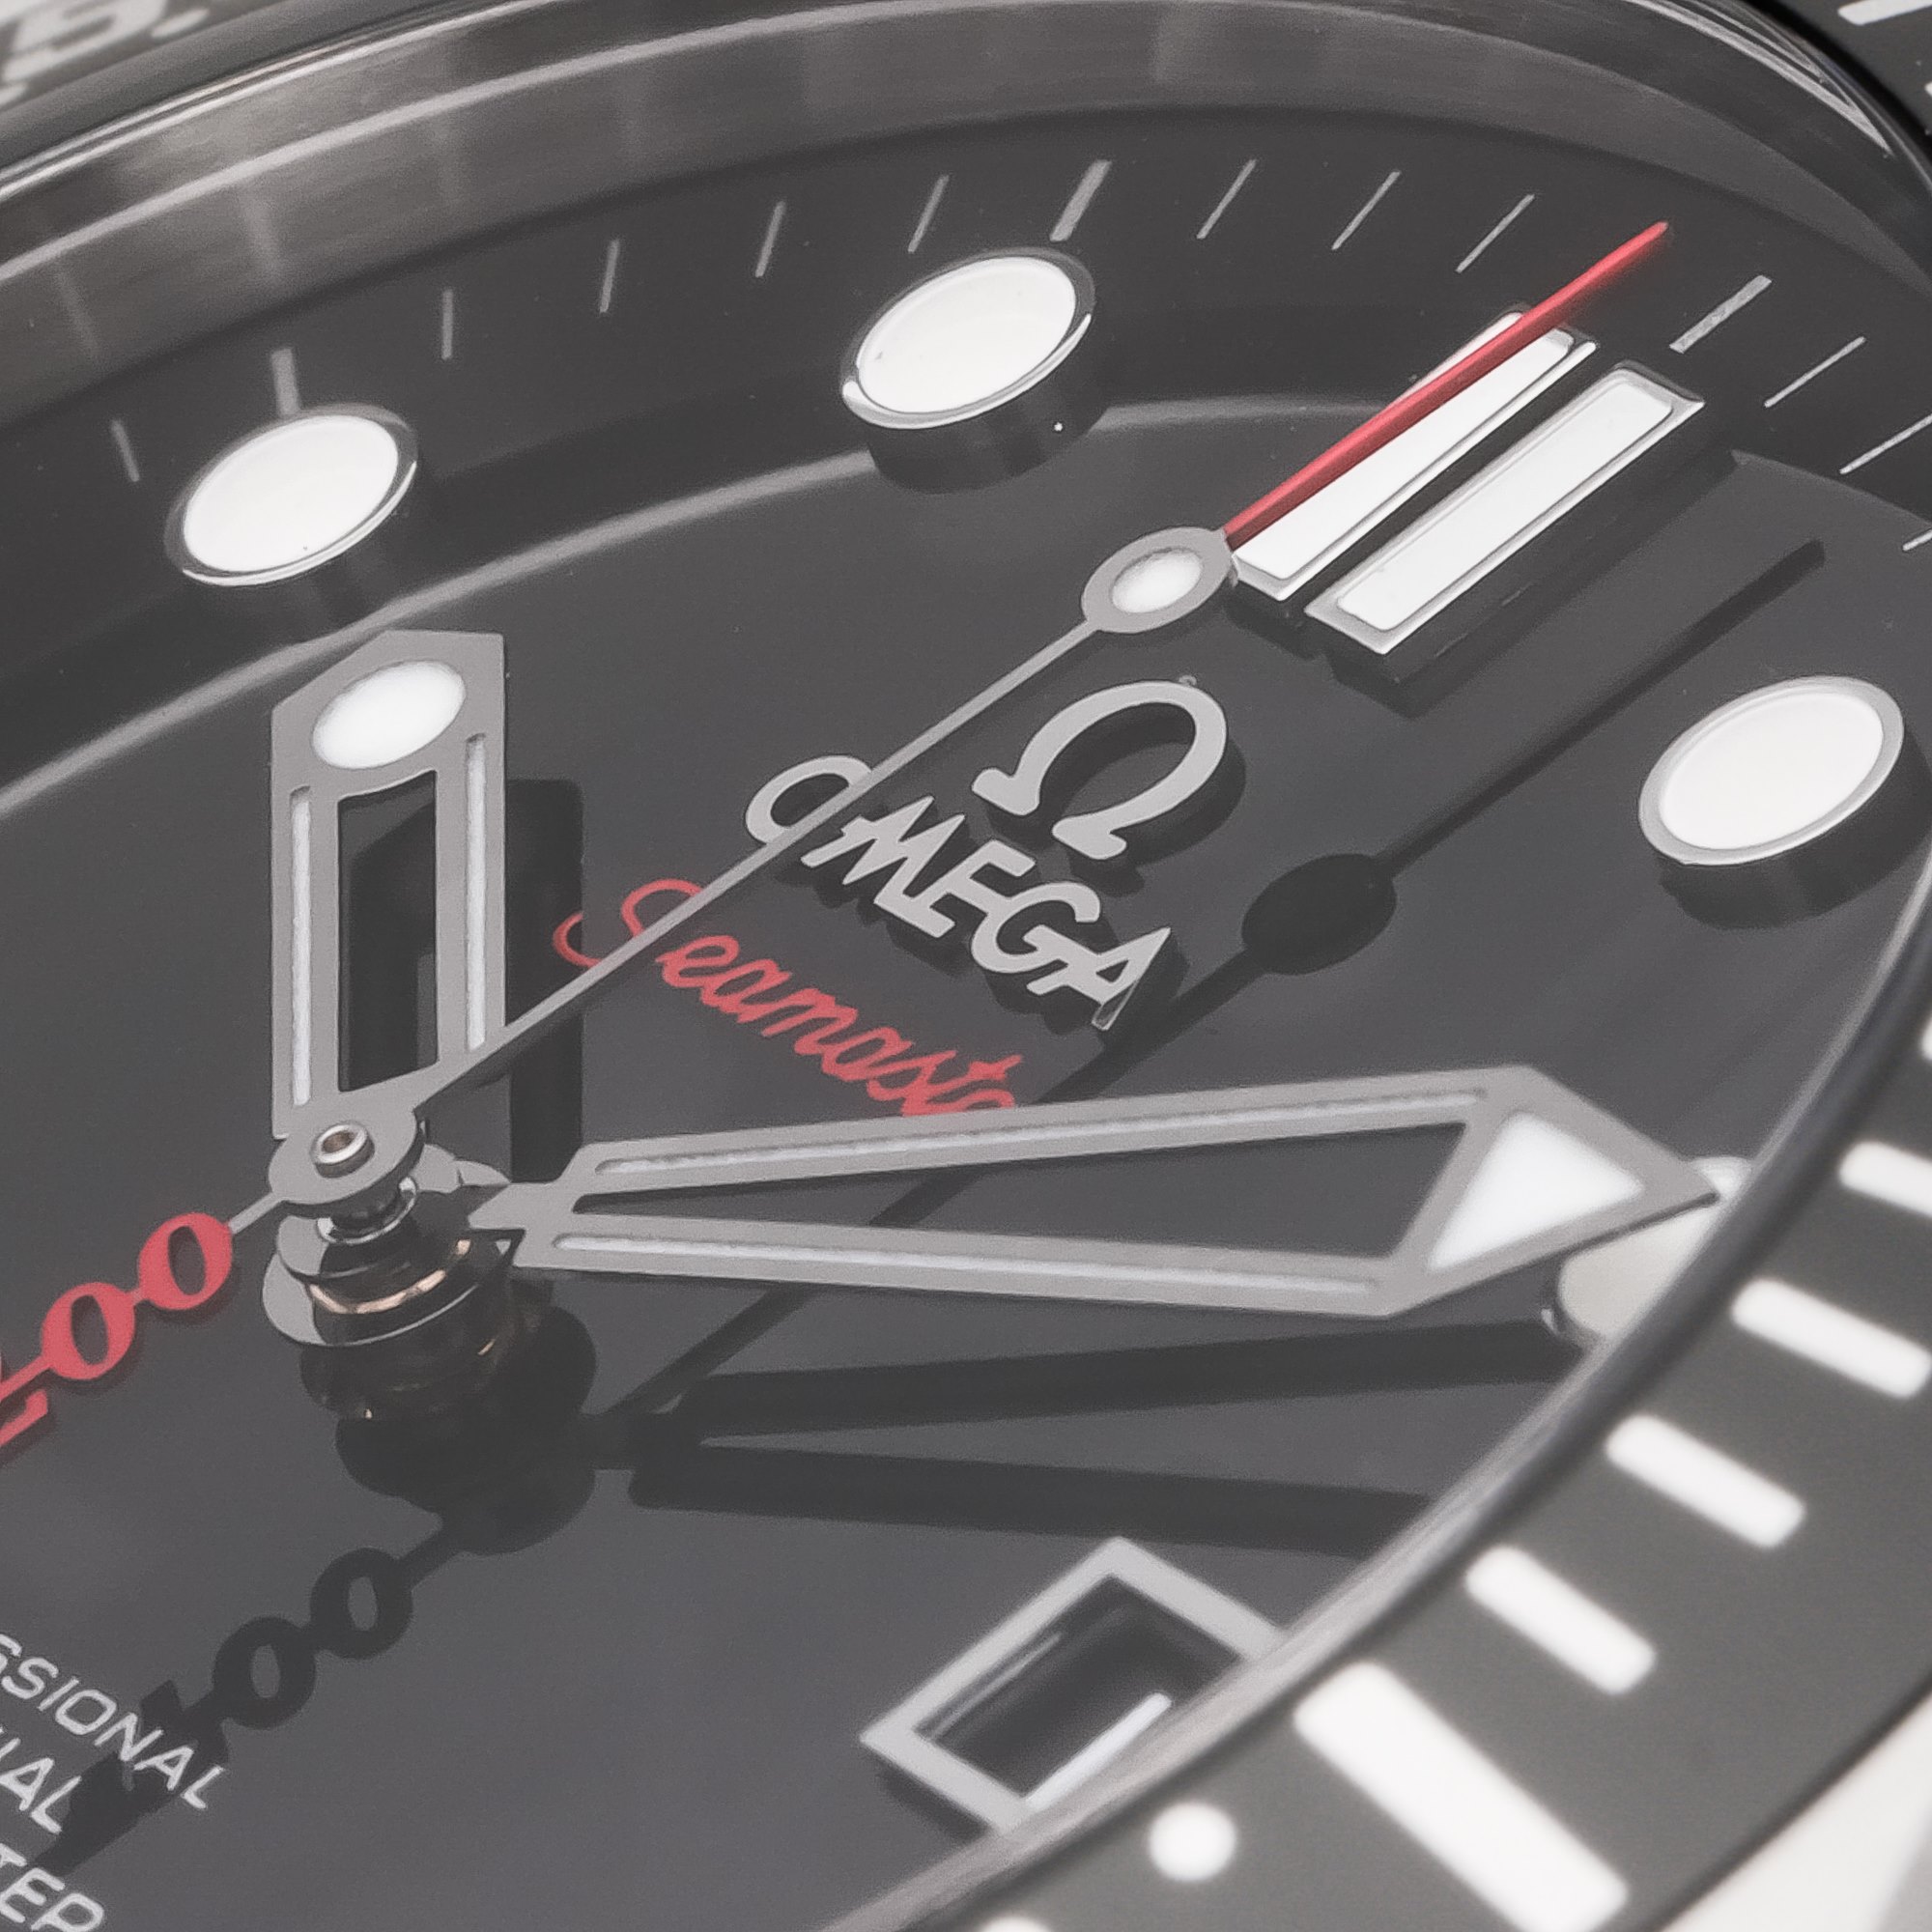 Omega Seamaster 300 007 Limited Series of 10007 Roestvrij Staal 212.30.41.20.01.001